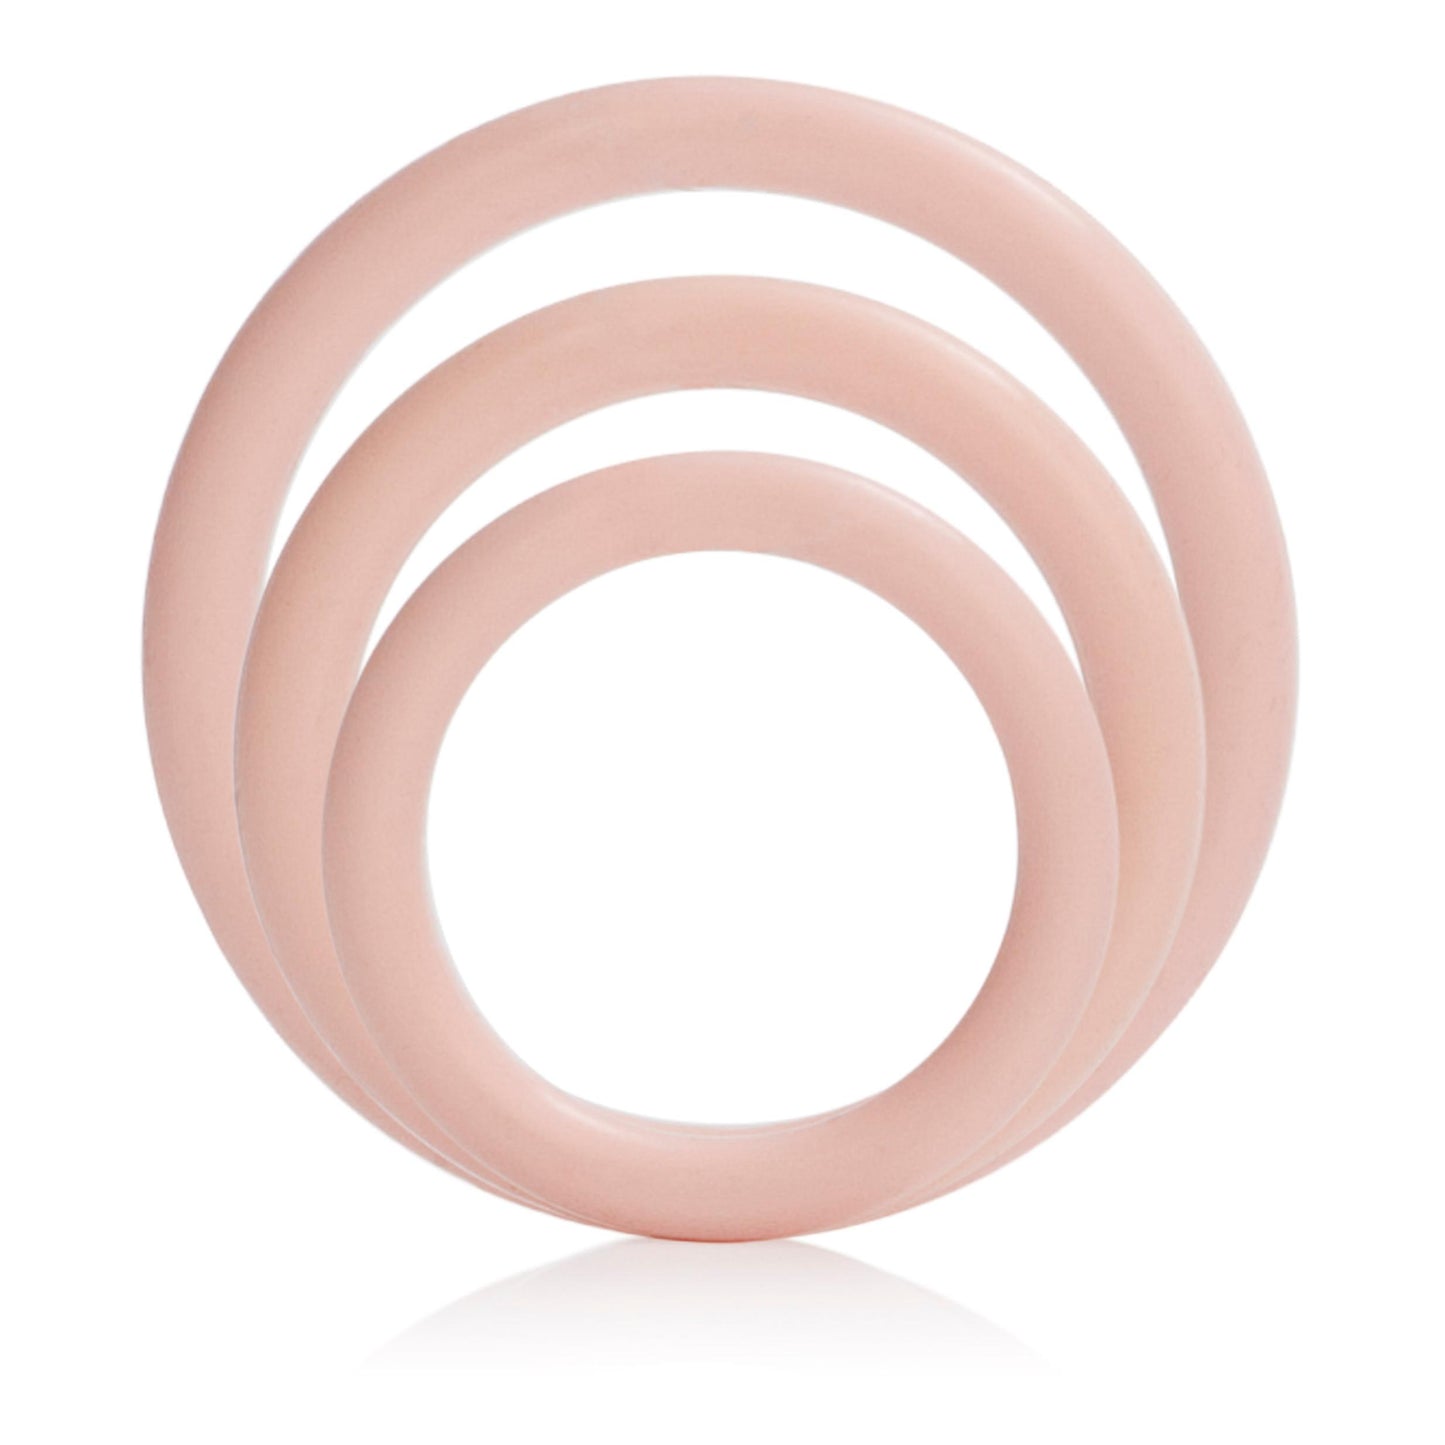 Silicone Support Rings - Ivory